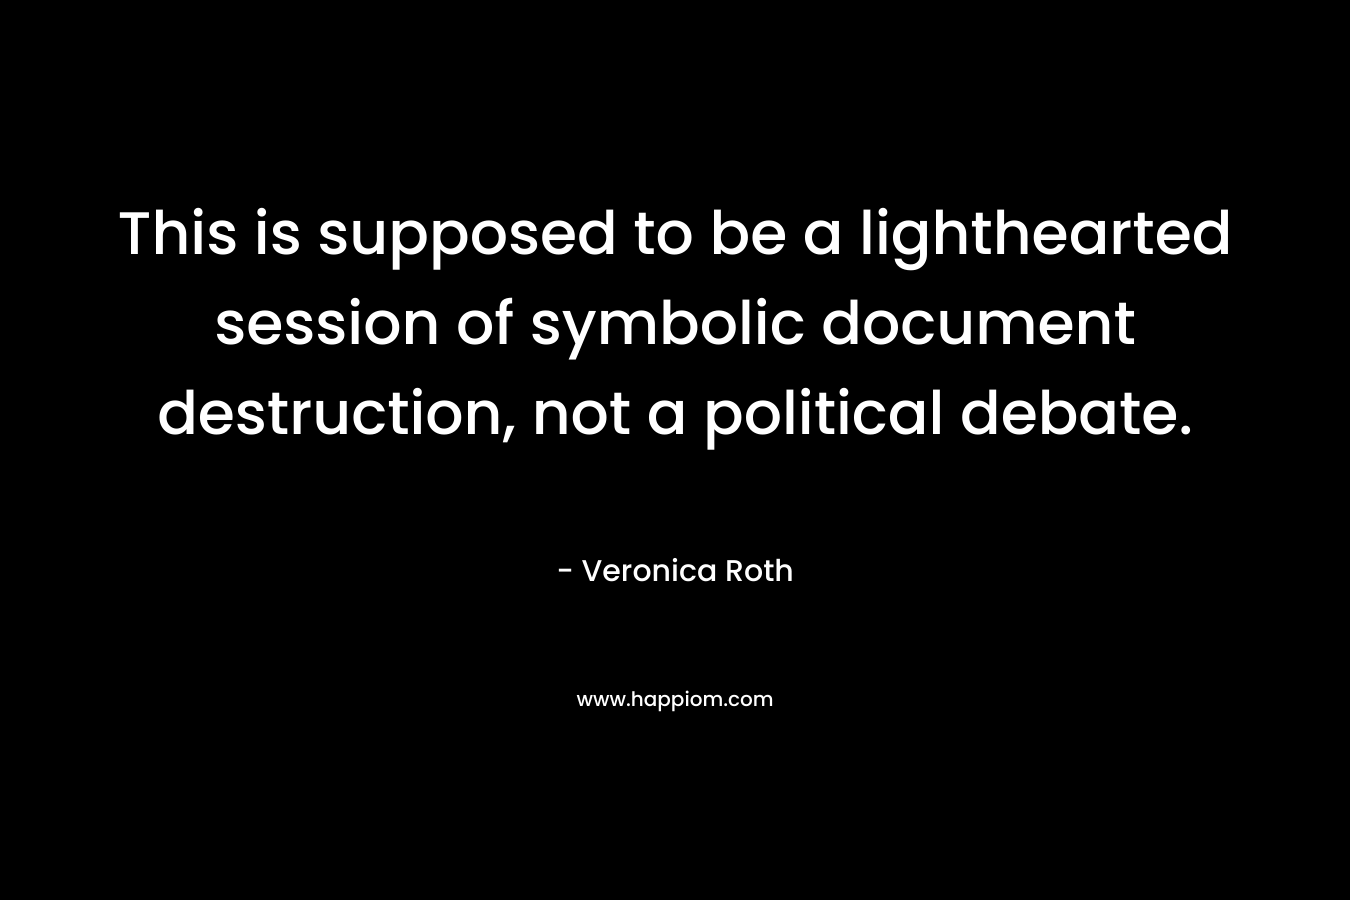 This is supposed to be a lighthearted session of symbolic document destruction, not a political debate. – Veronica Roth